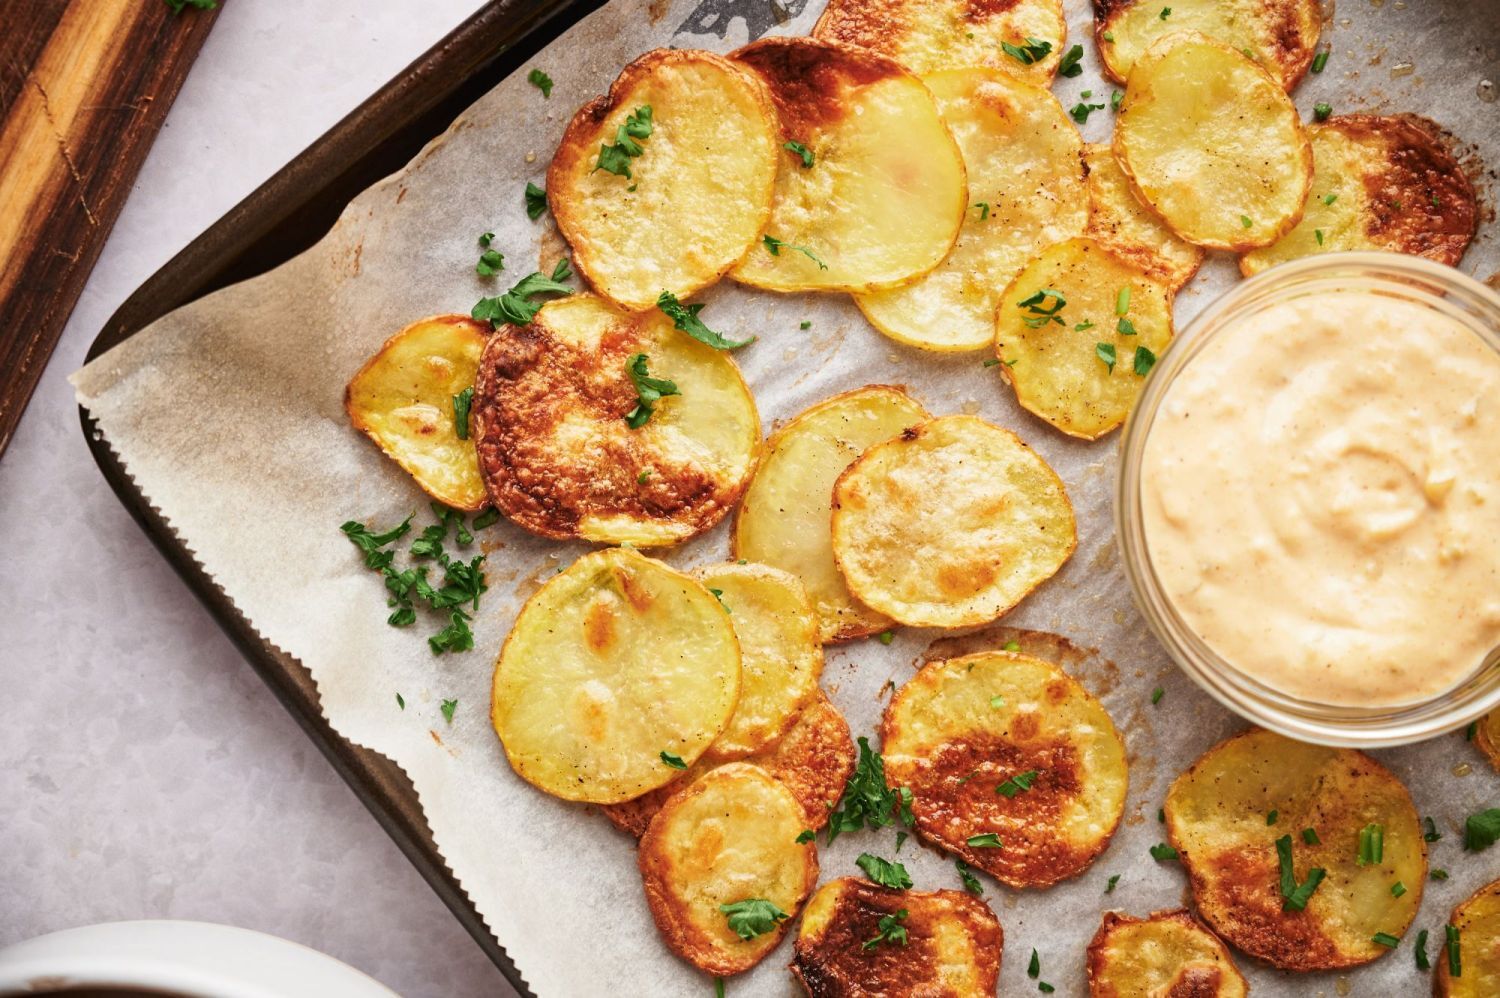 Are Baked Potato Chips Better for You Than Regular Chips? / Nutrition /  Healthy Eating